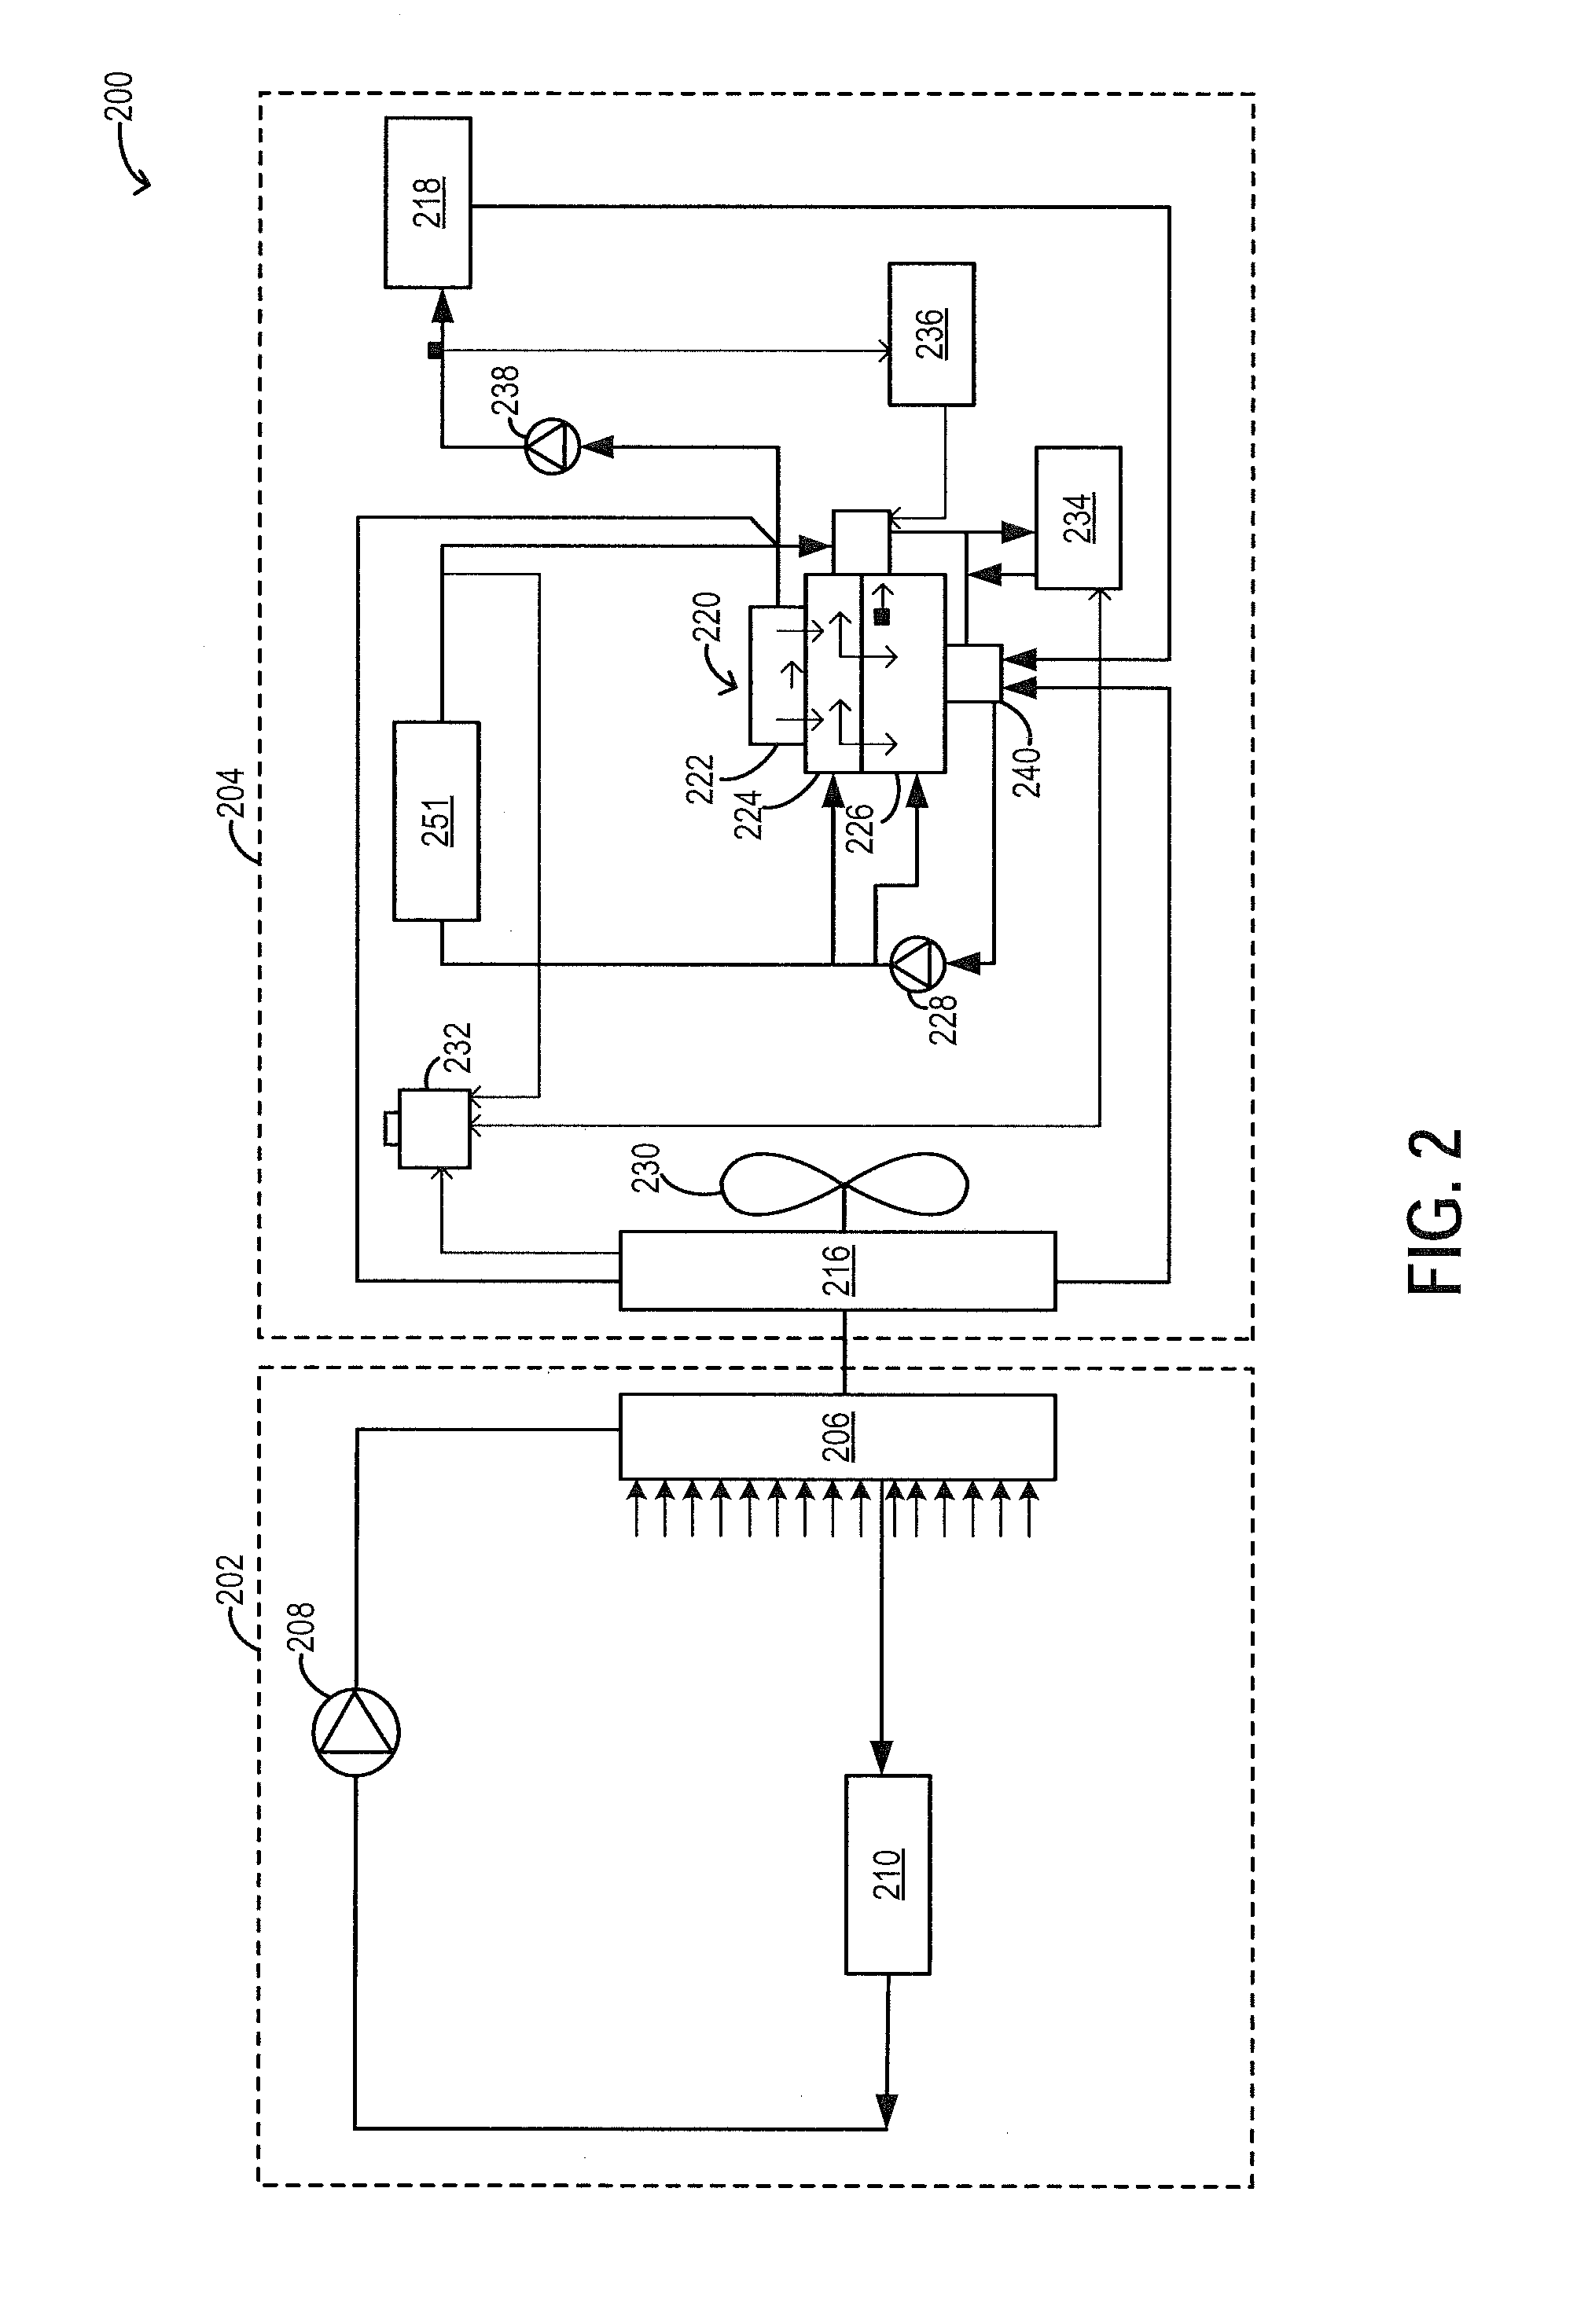 Methods and systems for condensation control